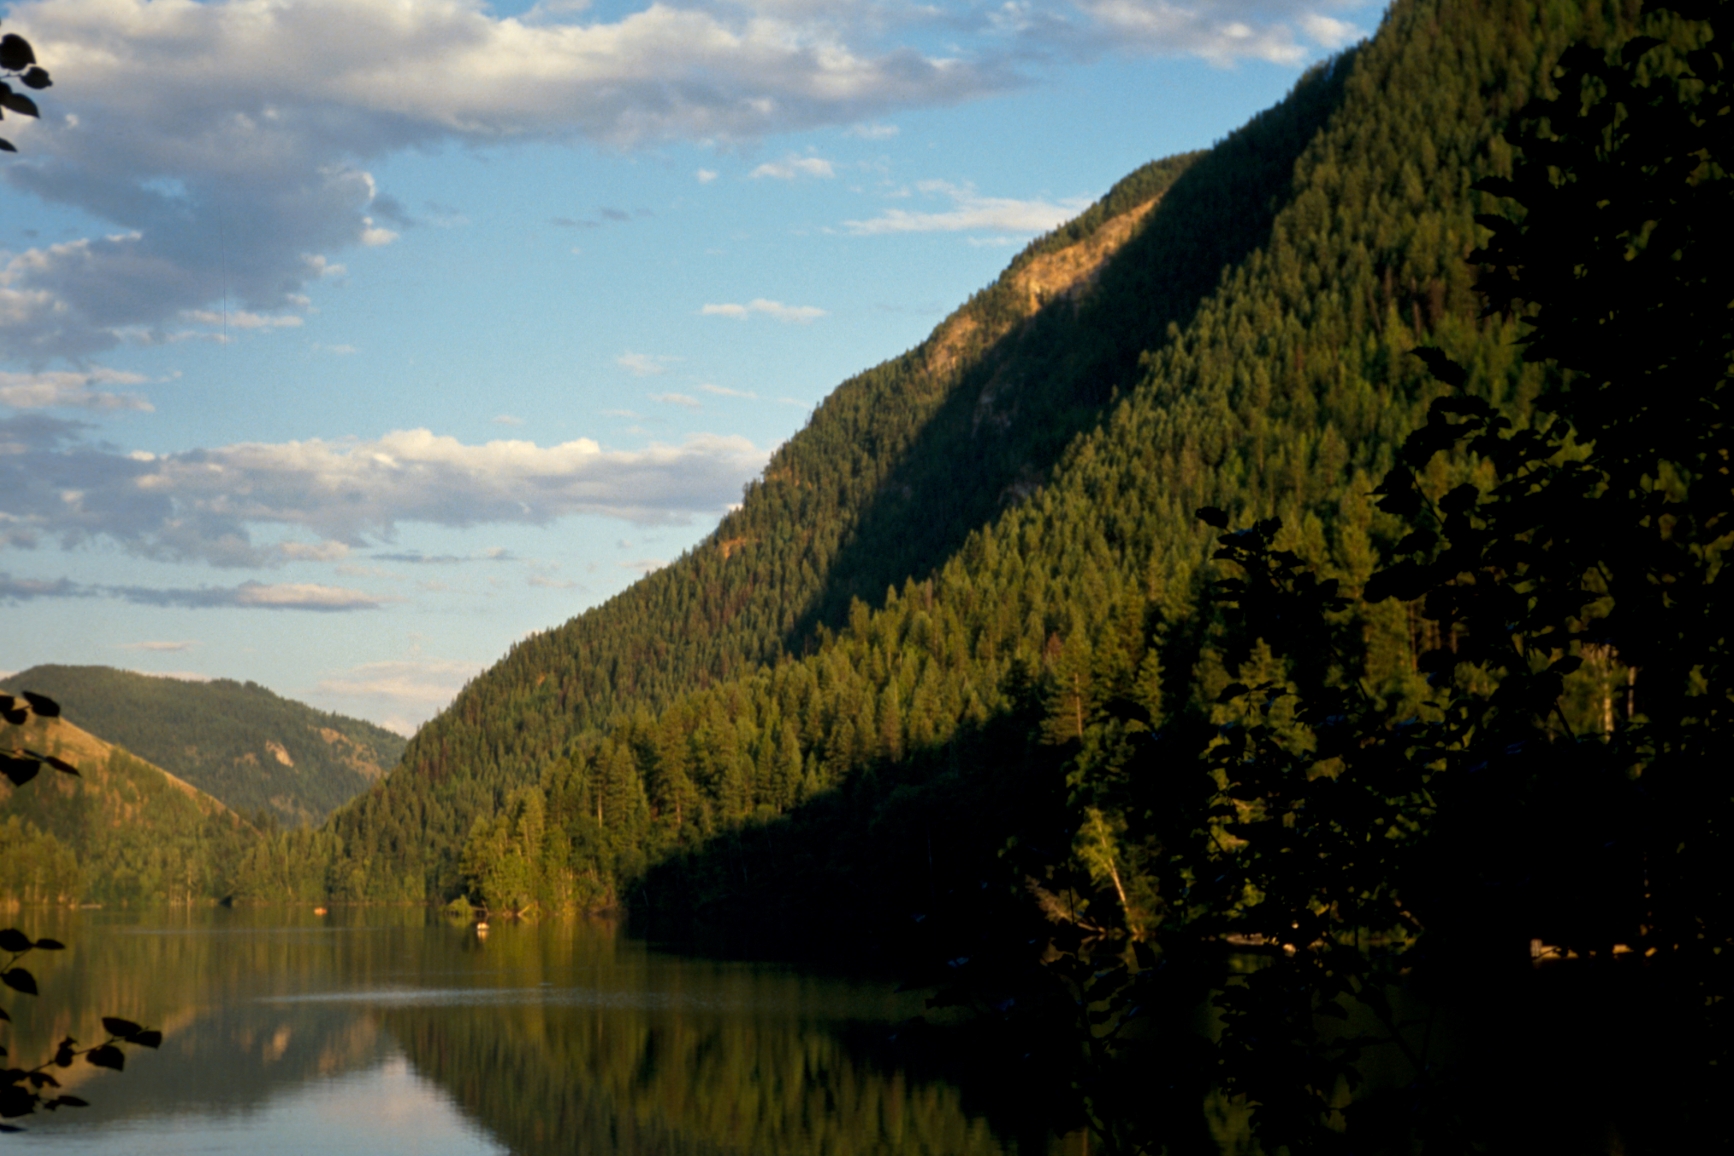 View of Echo Lake during golden hour, with the mountain and forests in the nearby distance.